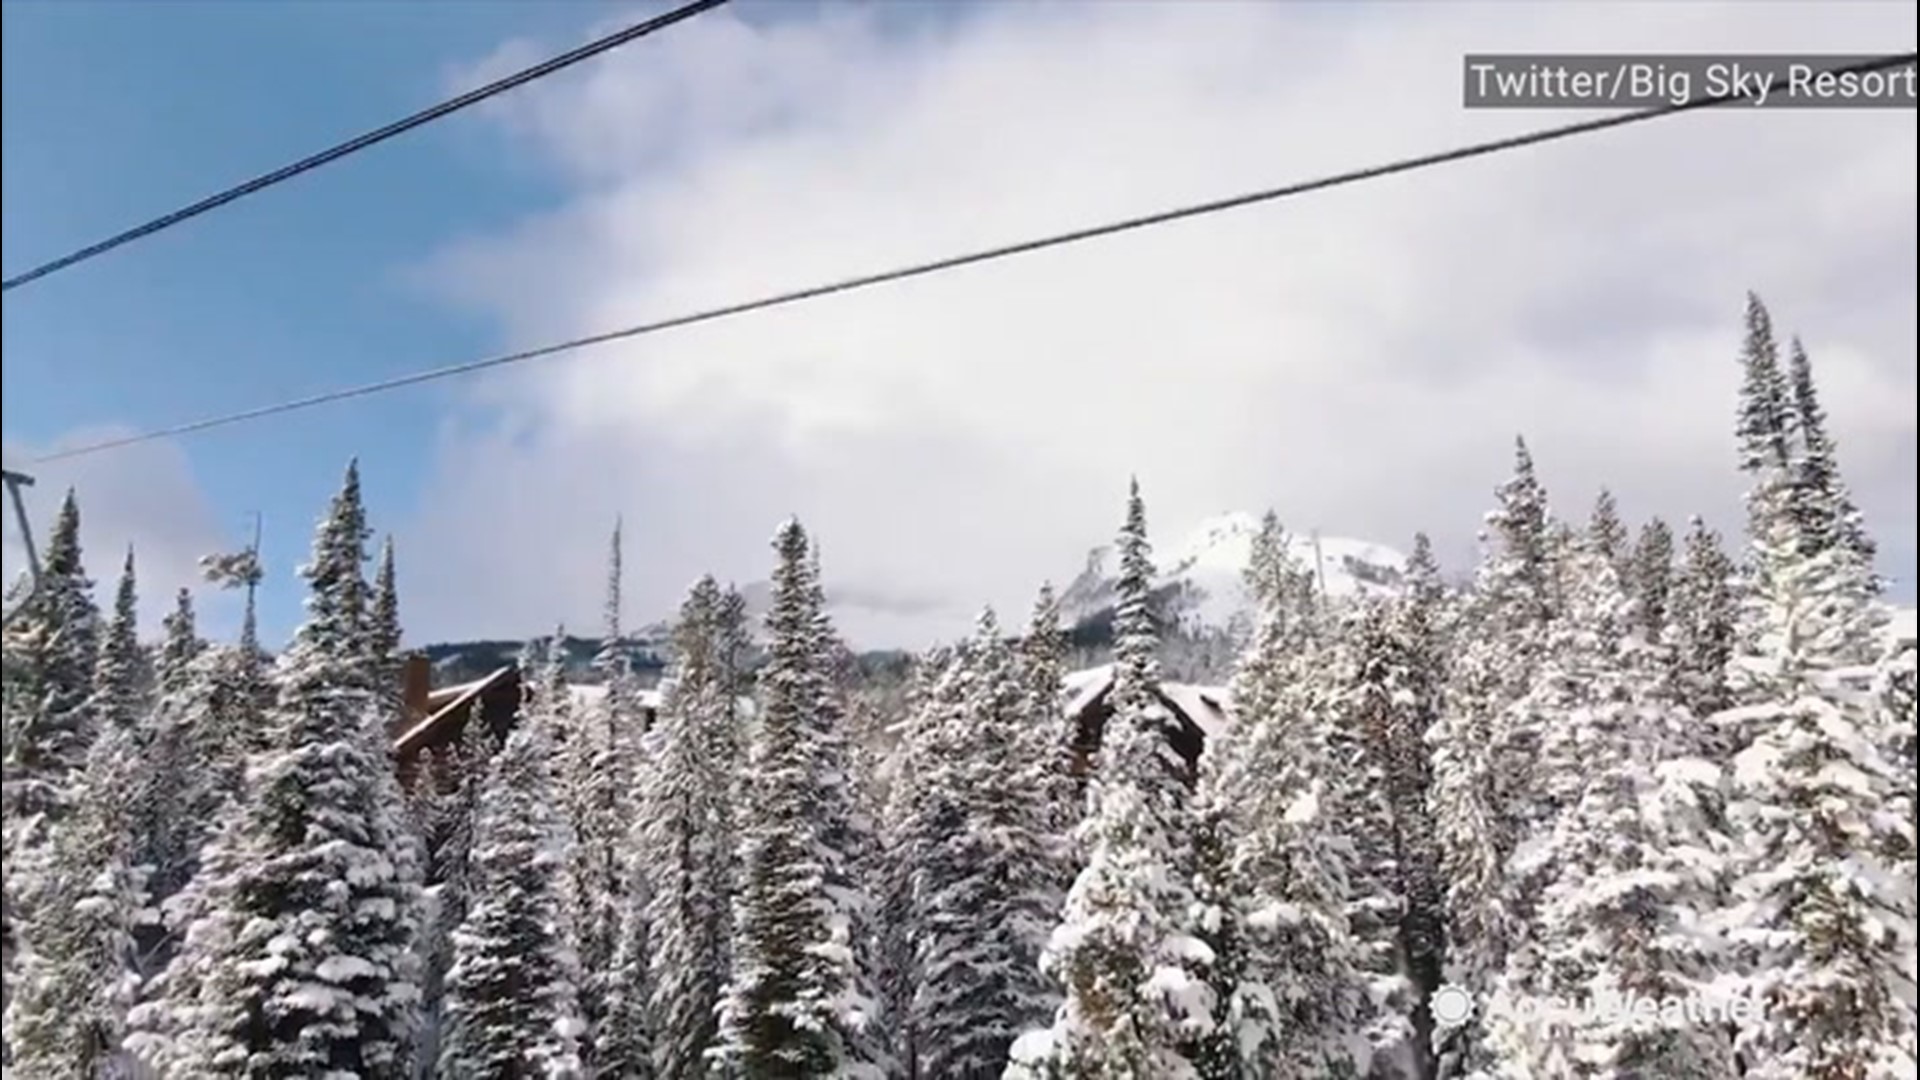 Six inches of fresh snow fell at Big Sky Resort in Big Sky, Montana, on Oct. 20, getting the ski resort prepped for opening day, which will be on Thanksgiving.